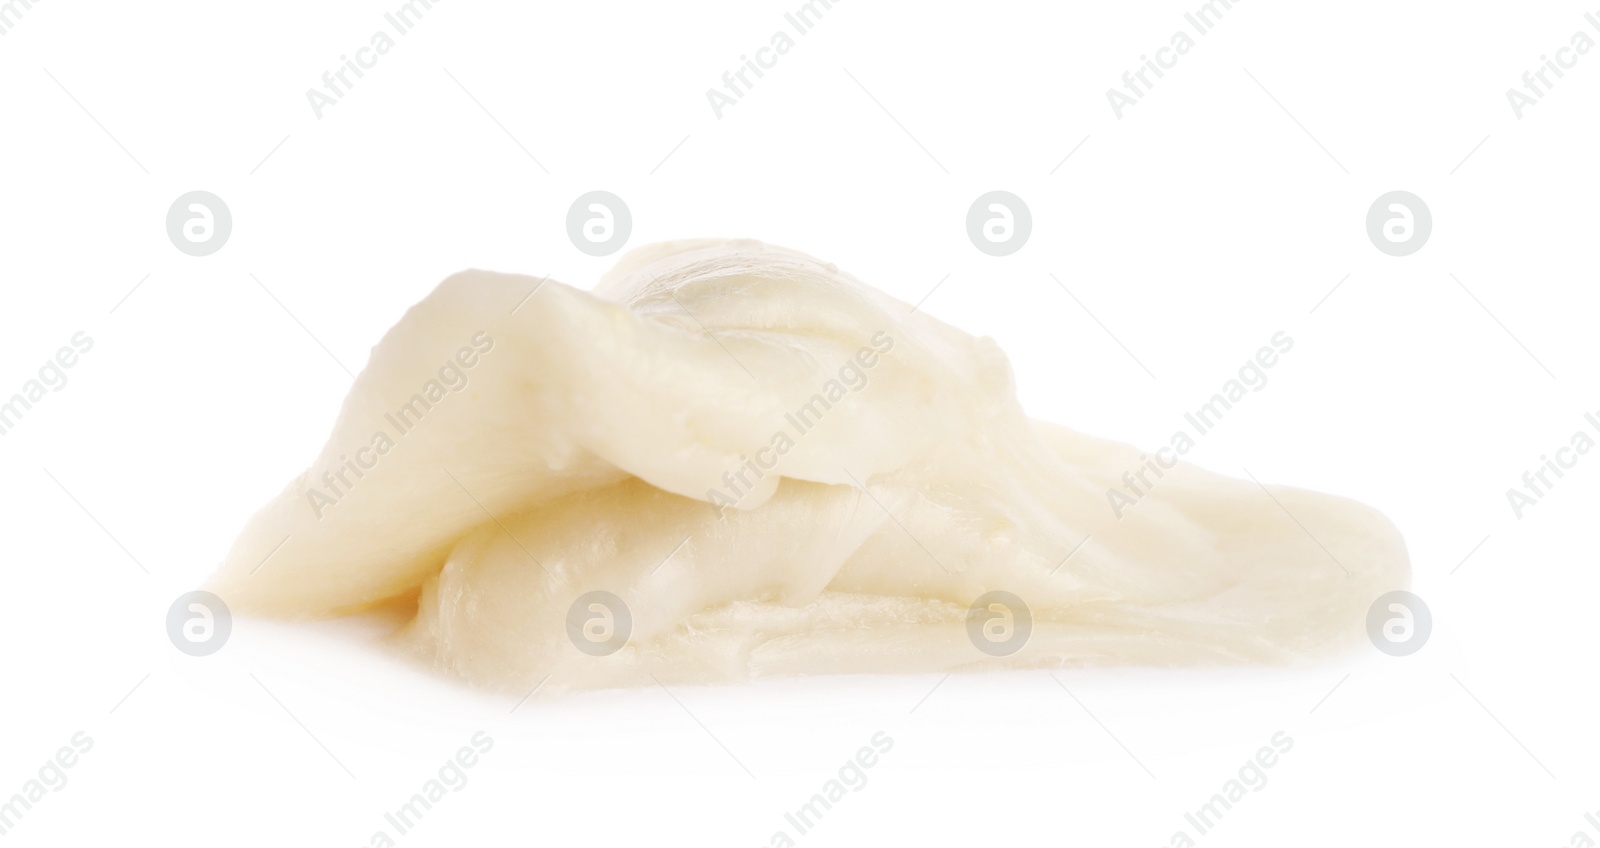 Photo of One used chewing gum on white background